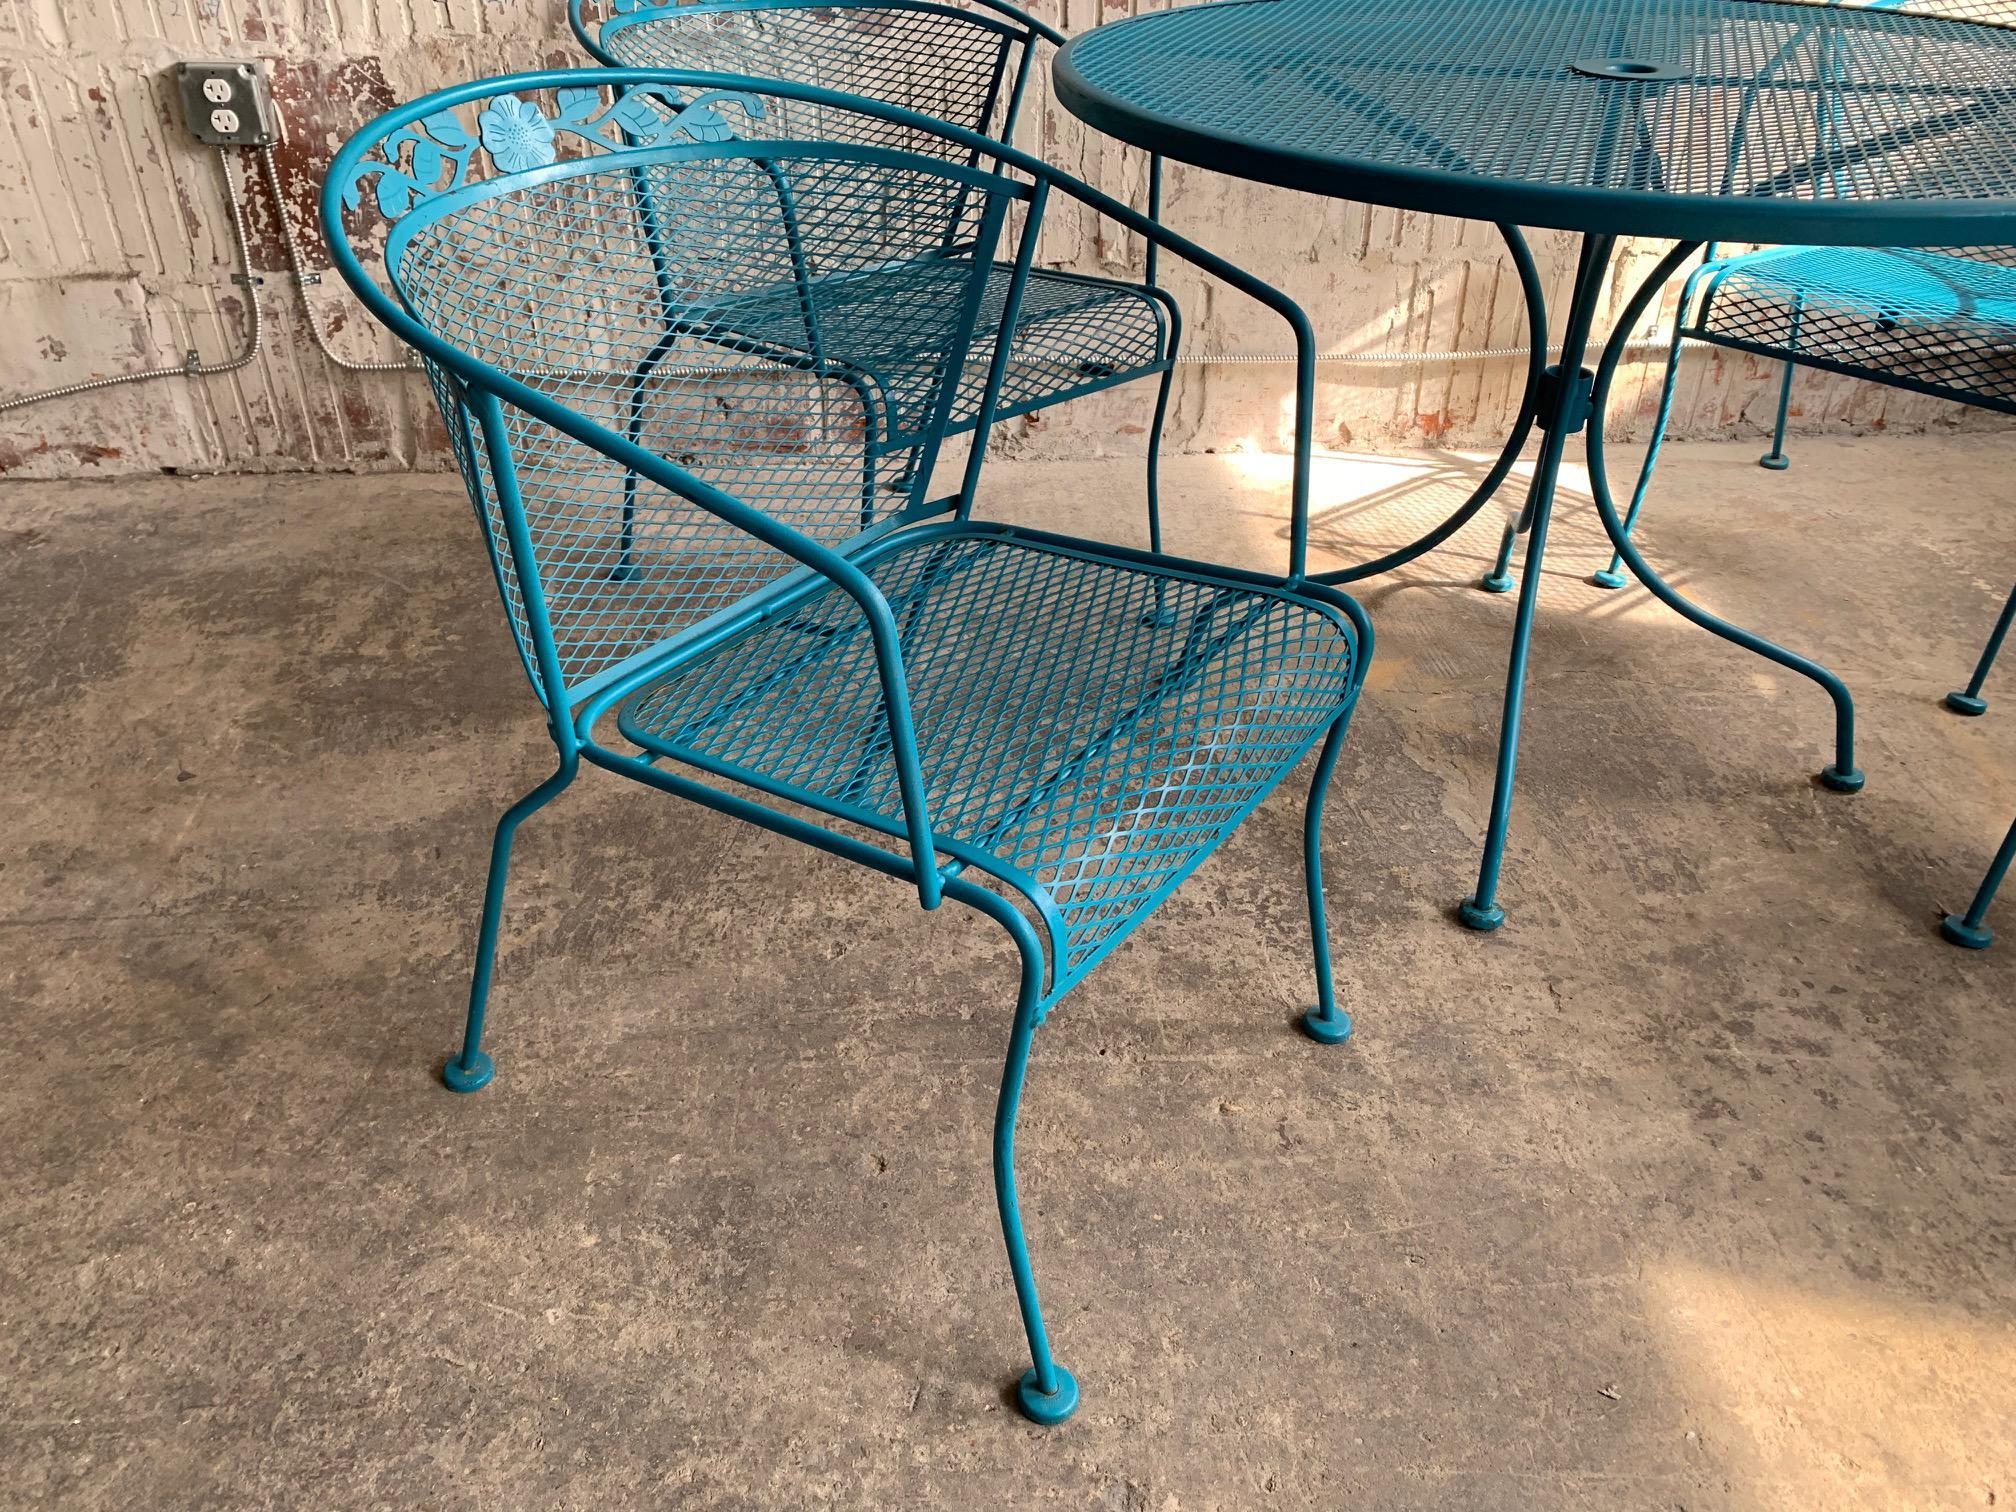 Vintage wrought iron patio set circa 1950s in the manner of Salterini or Woodard. Satin turquoise blue finish. Very good structural condition with minor signs of age appropriate wear to finish. Set includes table and 4 chairs as shown.
Table